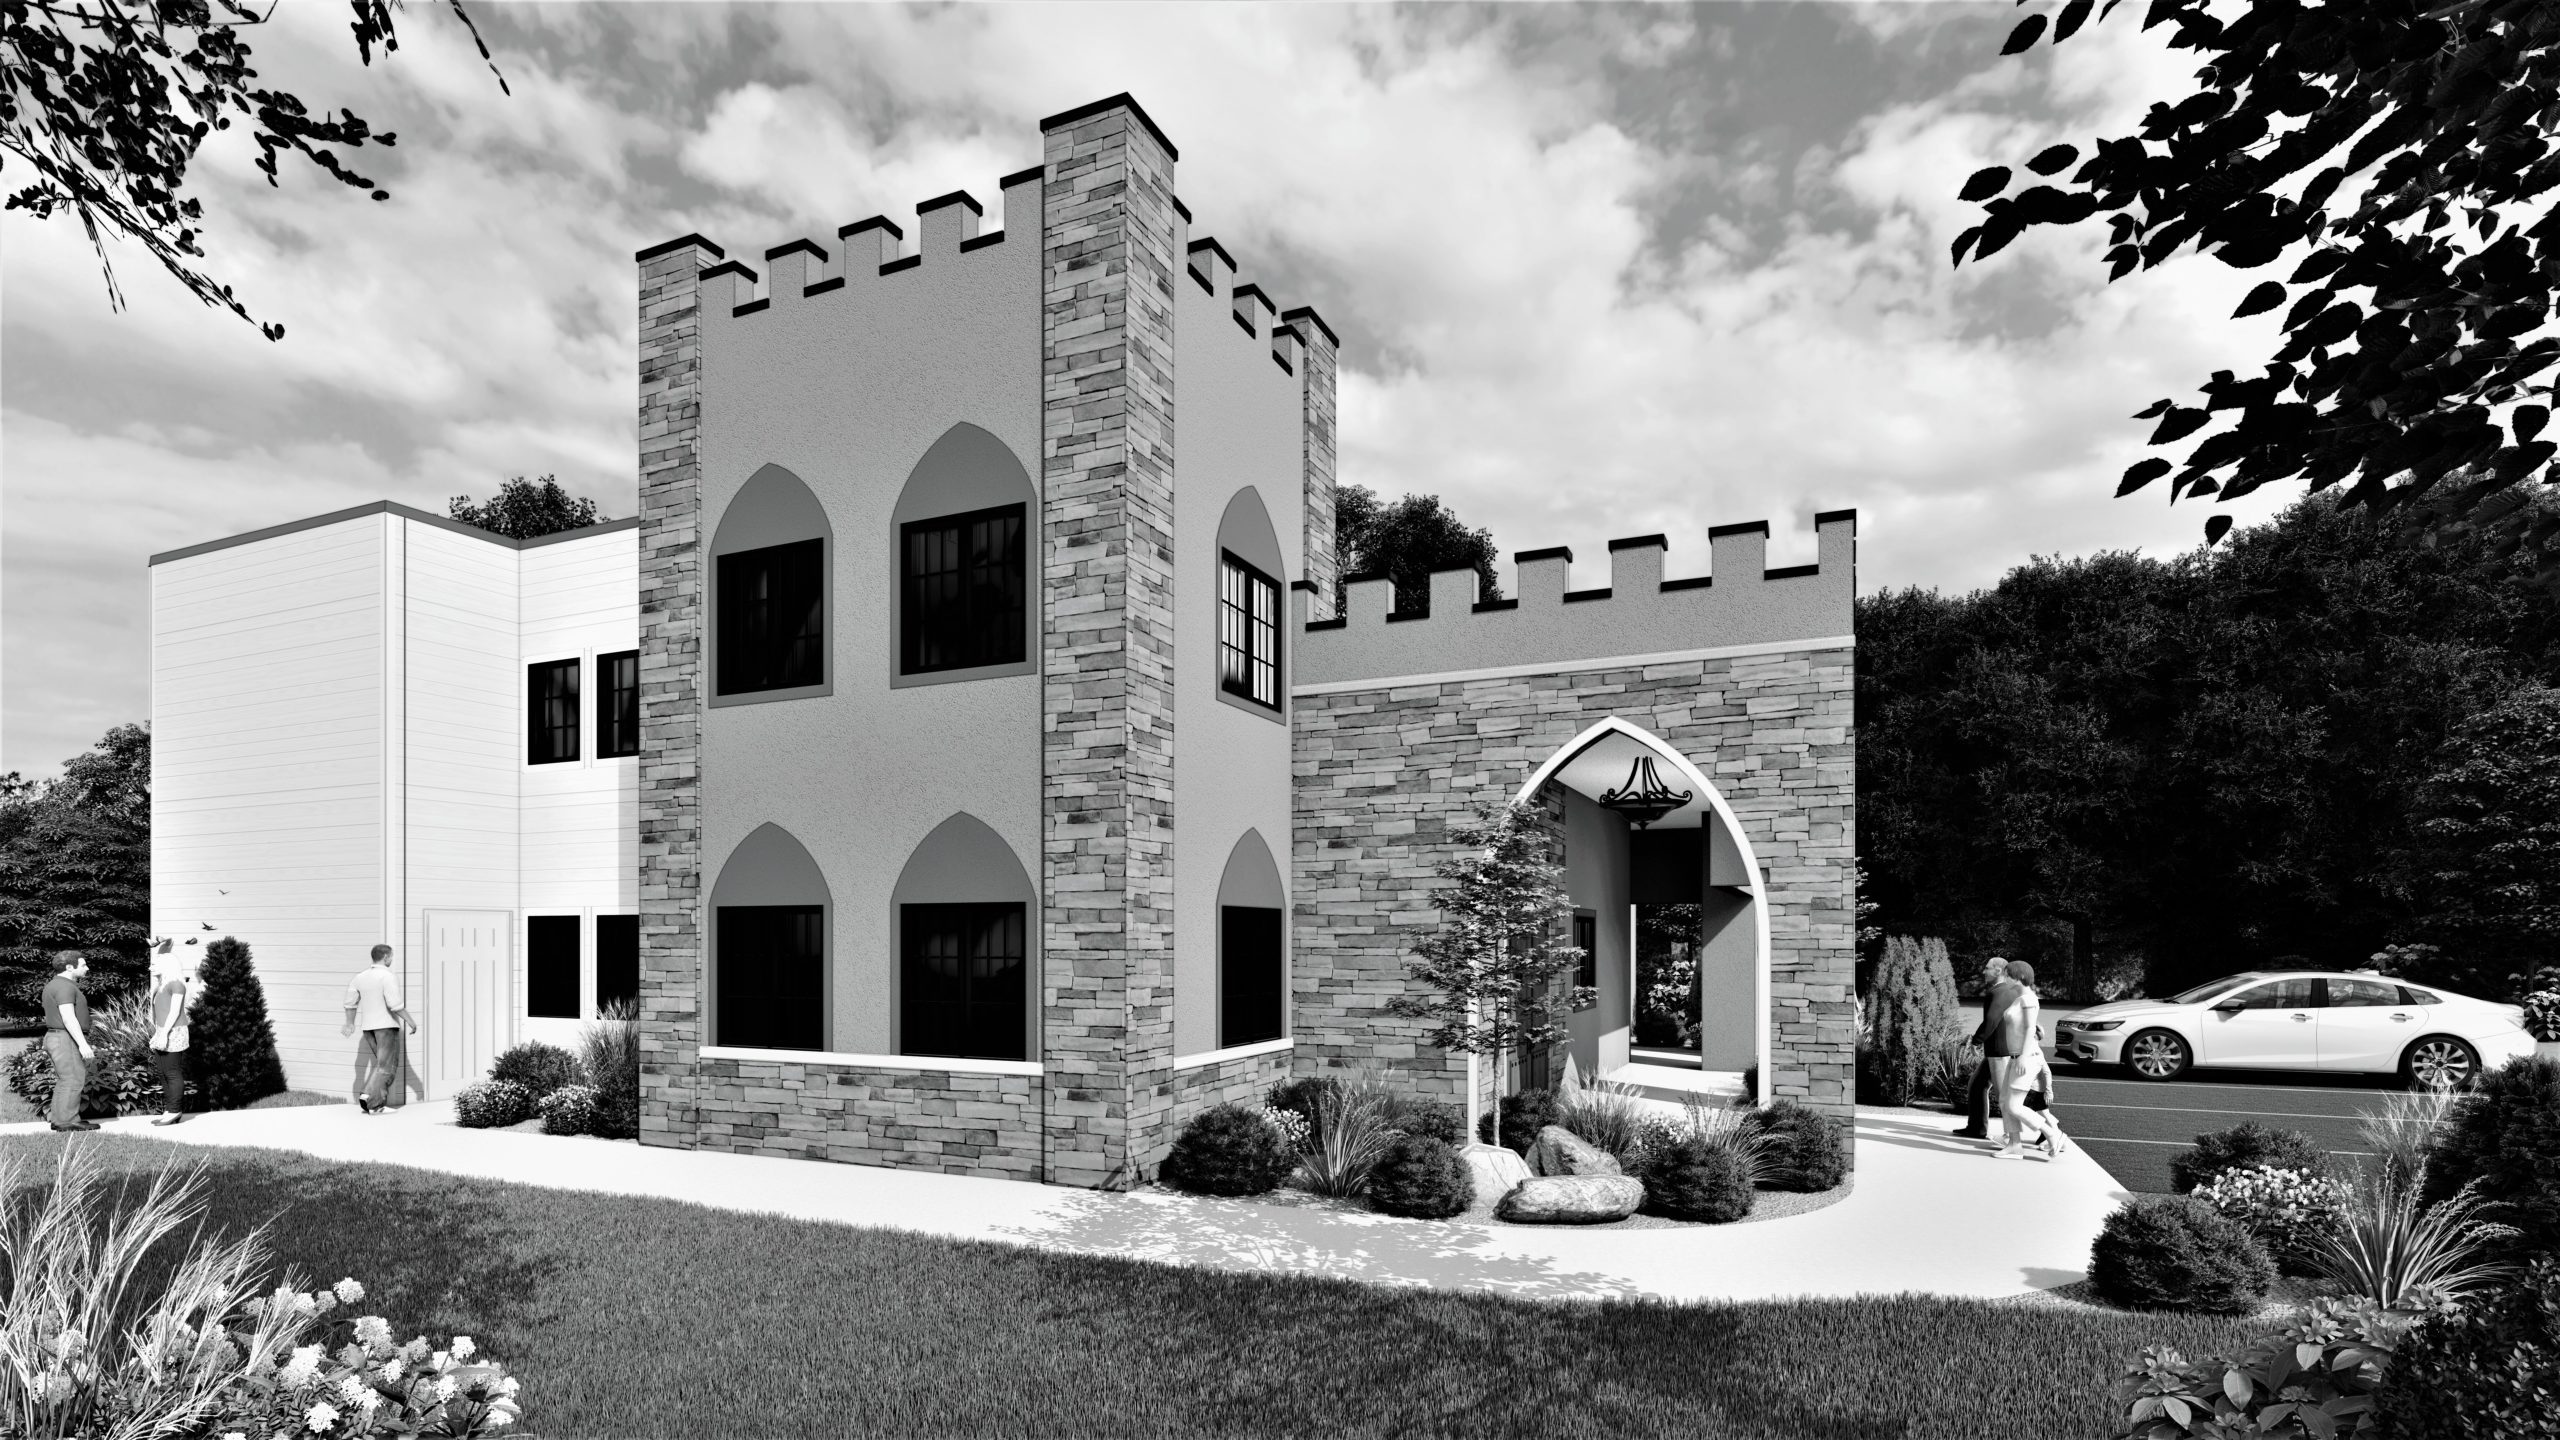 Exterior rendering of Nobility Reigns castle-style building